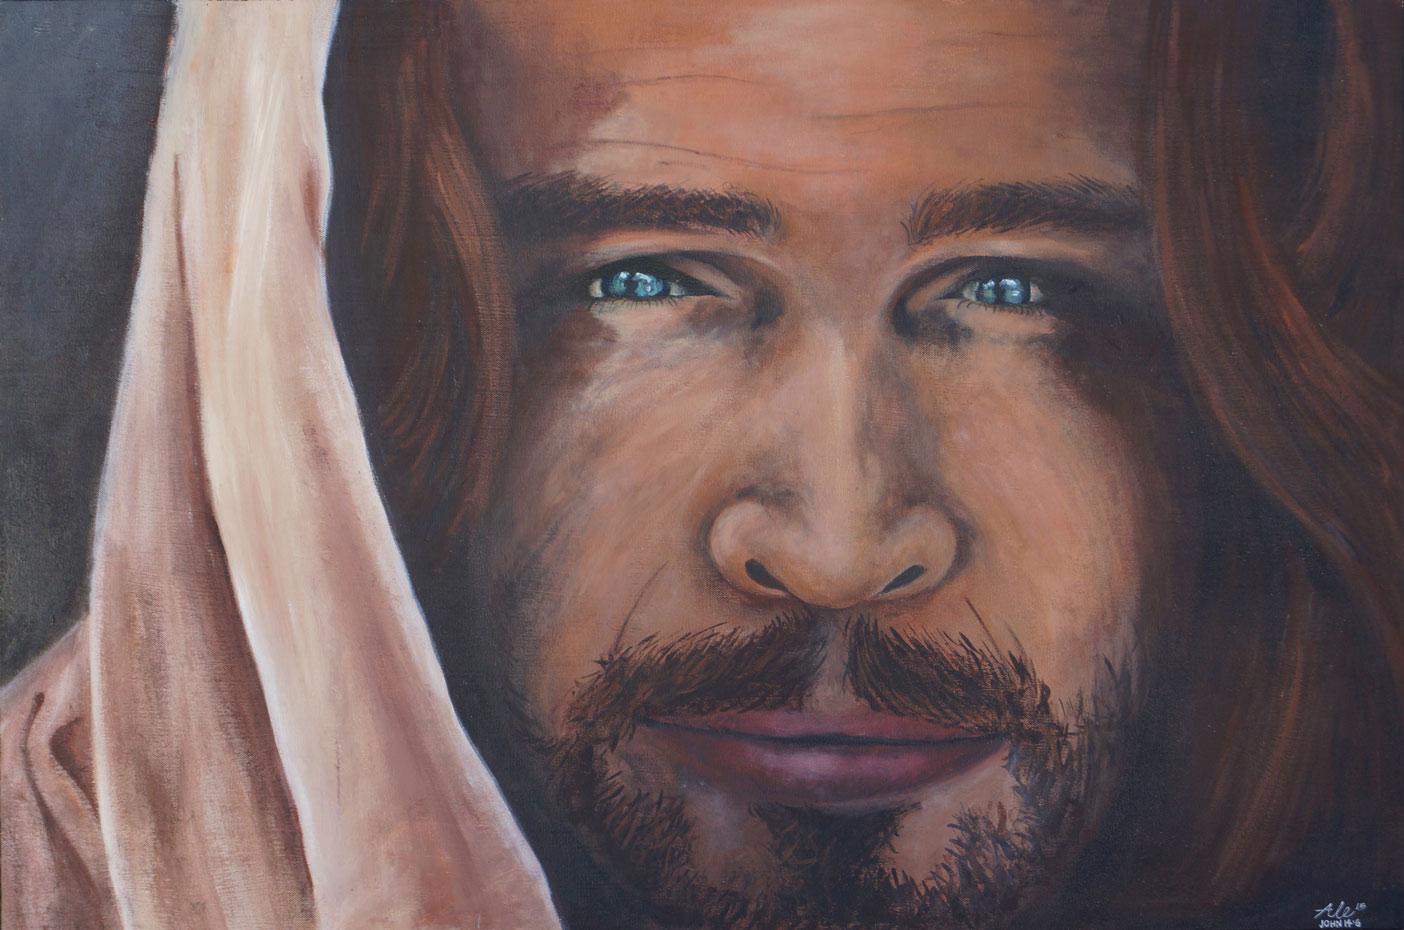 Painting of Jesus Christ's face with piercing blue eyes.